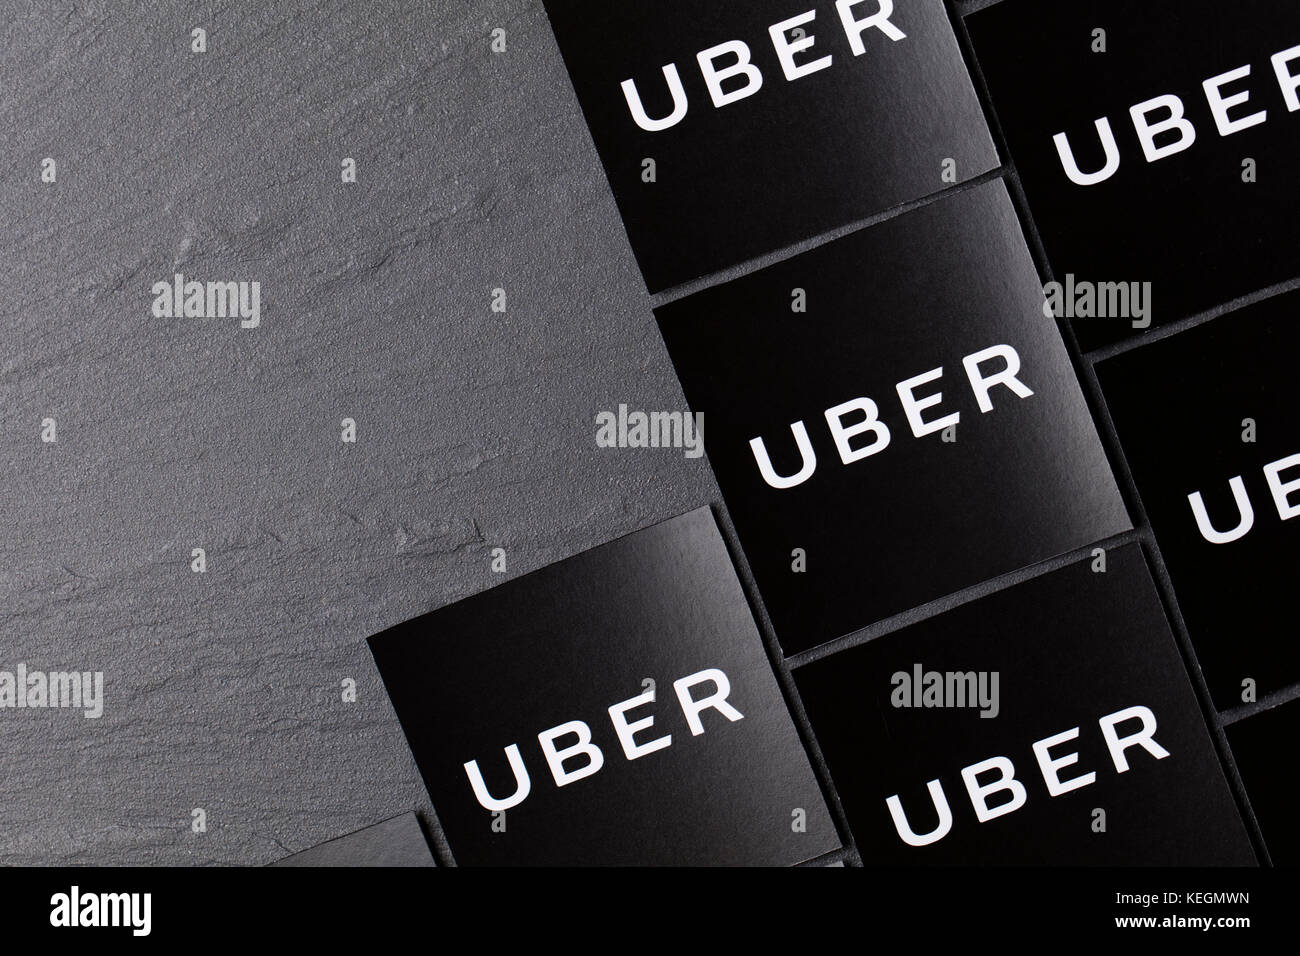 A photograph of  the Uber logo. Uber is a popular taxi style transport service application, founded in 2009 Stock Photo